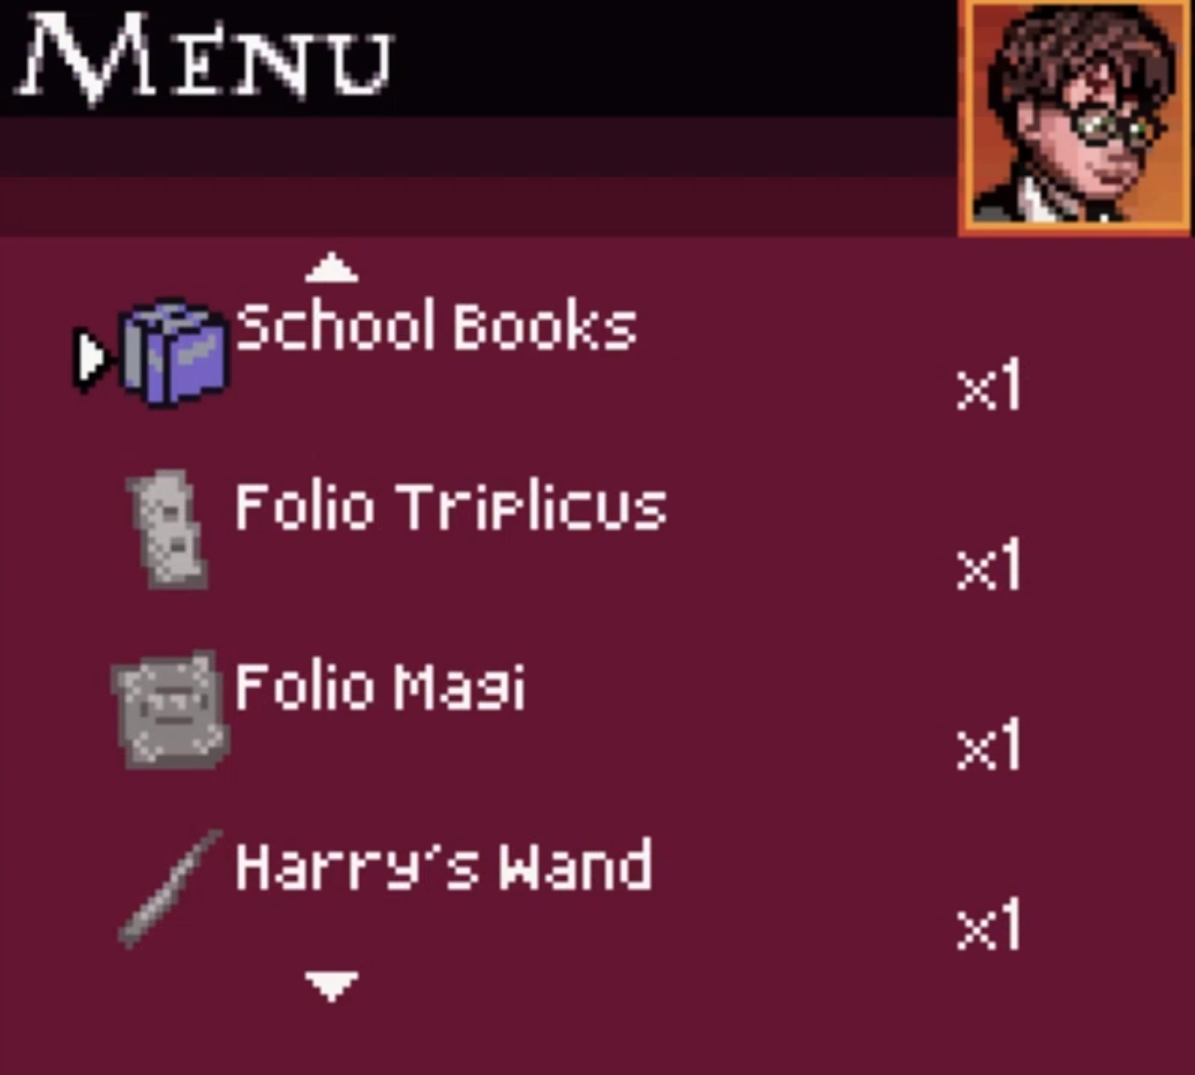 Harry Potter and the Philosopher's Stone: Harry's school supplies (books, and a wand) in his inventory